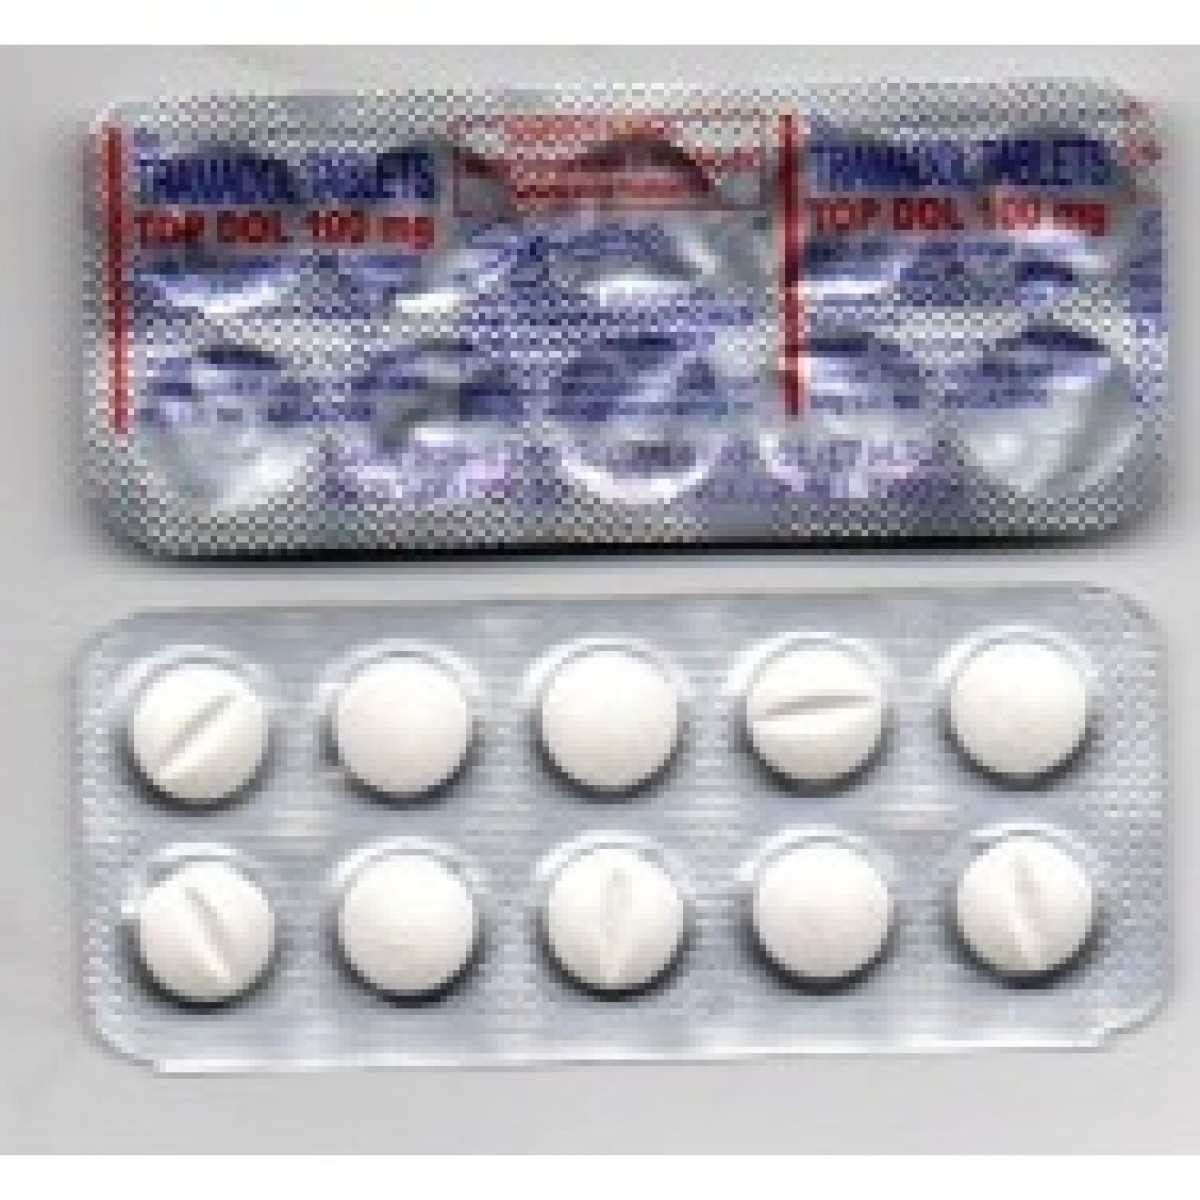 tramadol hcl 100 mg for pain